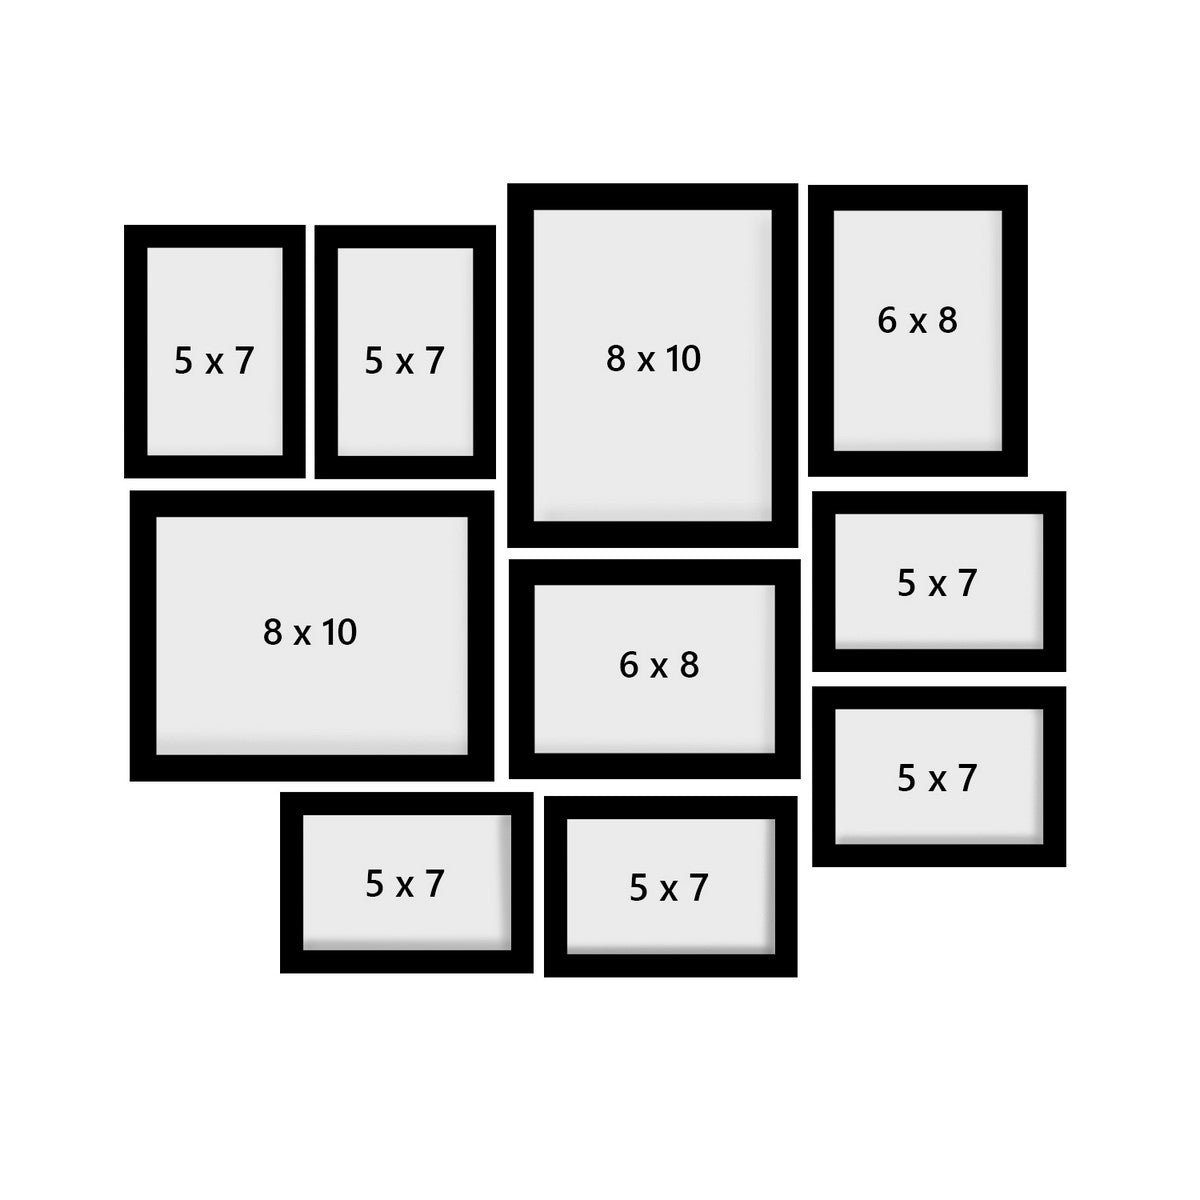 Memory Wall Collage Photo Frame - Set of 10 Photo Frames for 6 Photos of 5"x7", 2 Photos of 6"x8" and 2 Photos of 8"x10" 3